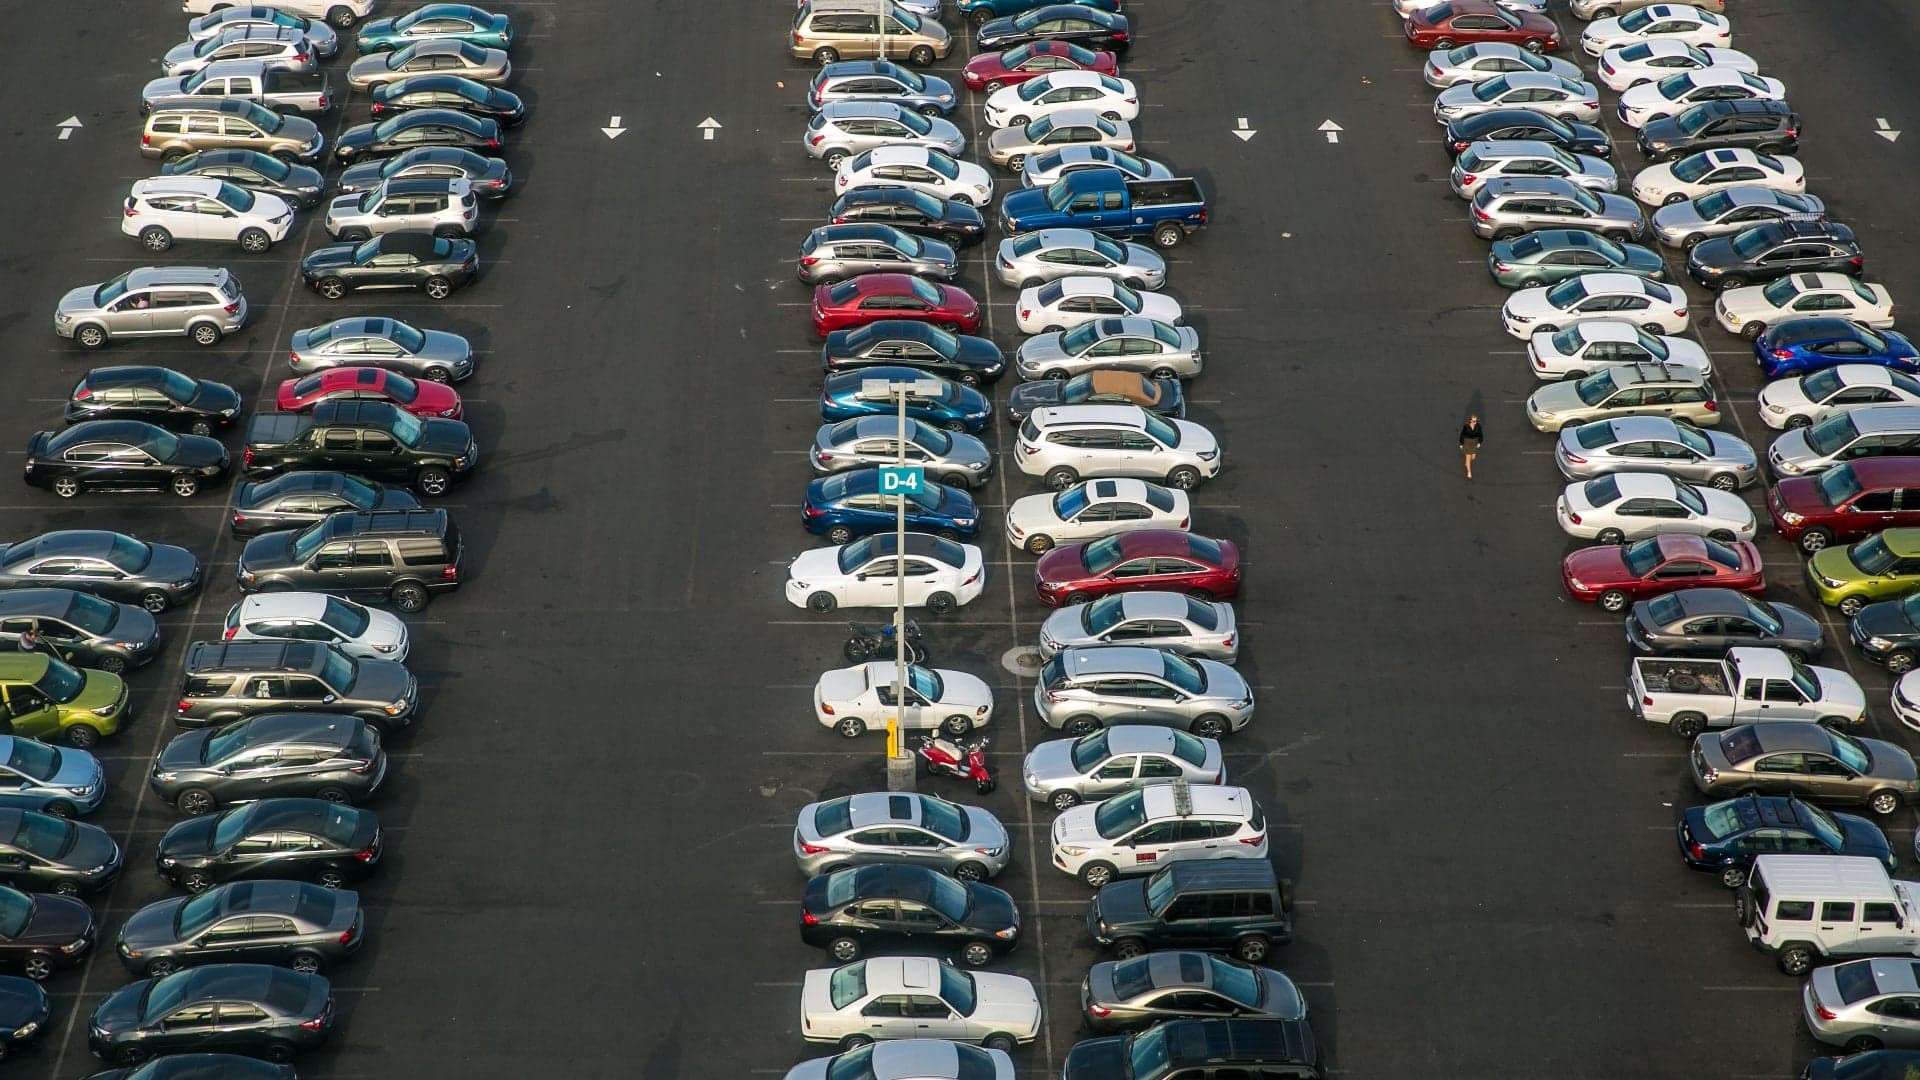 New Study Shows How Much Time and Money We Waste on Parking